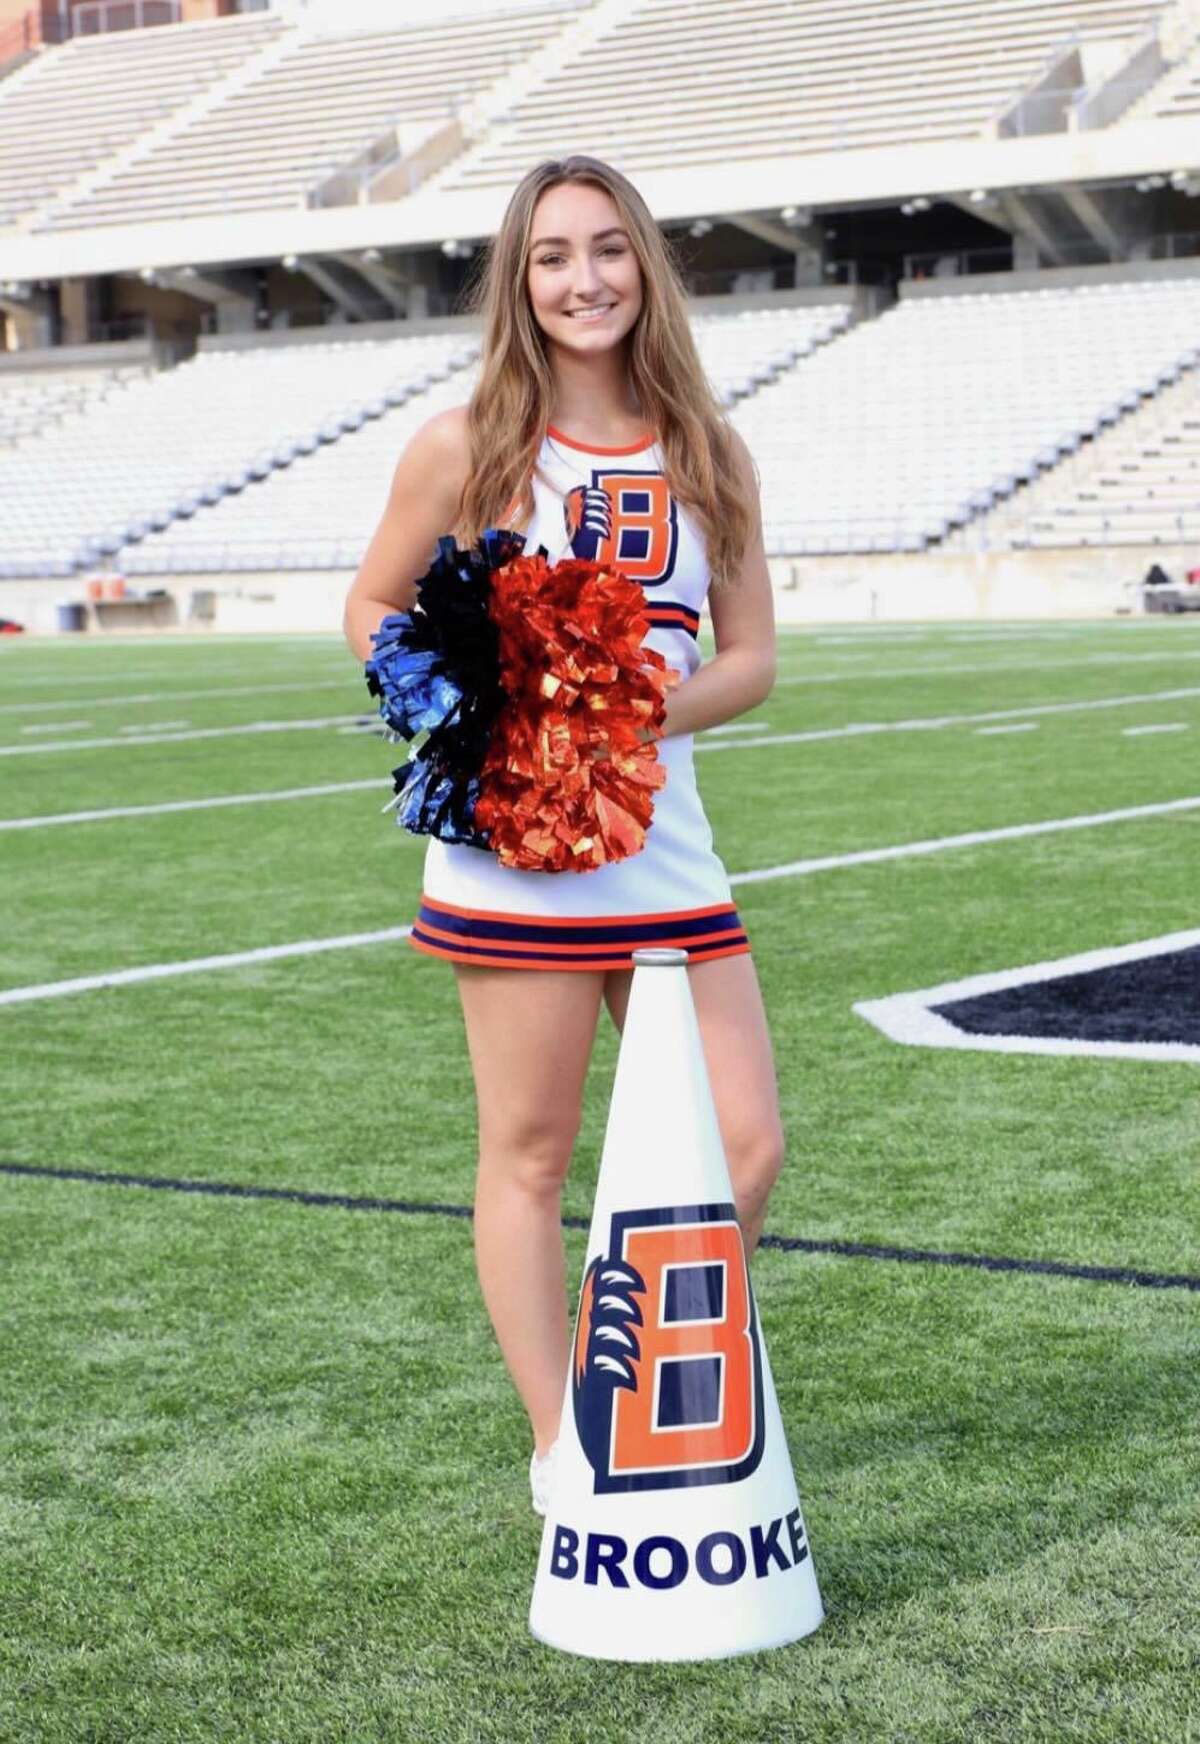 Brook Krolczyk is a member of the first Bridgeland High School class to graduate from the school since it opened in 2017.